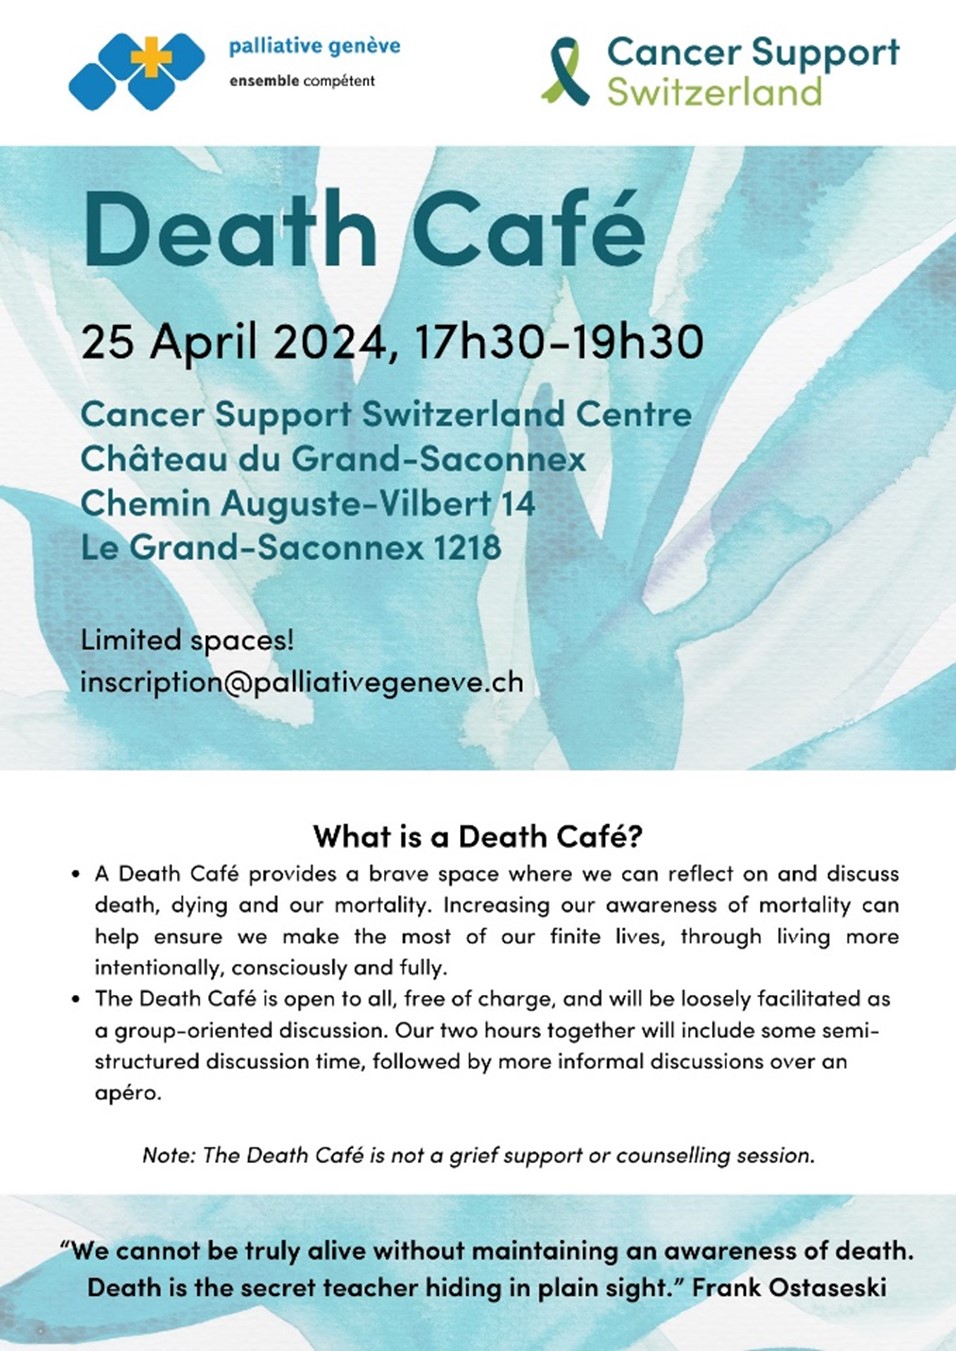 A flyer with information about a Death Cafe event being hosted by Cancer Support Switzerland and Palliative Genève